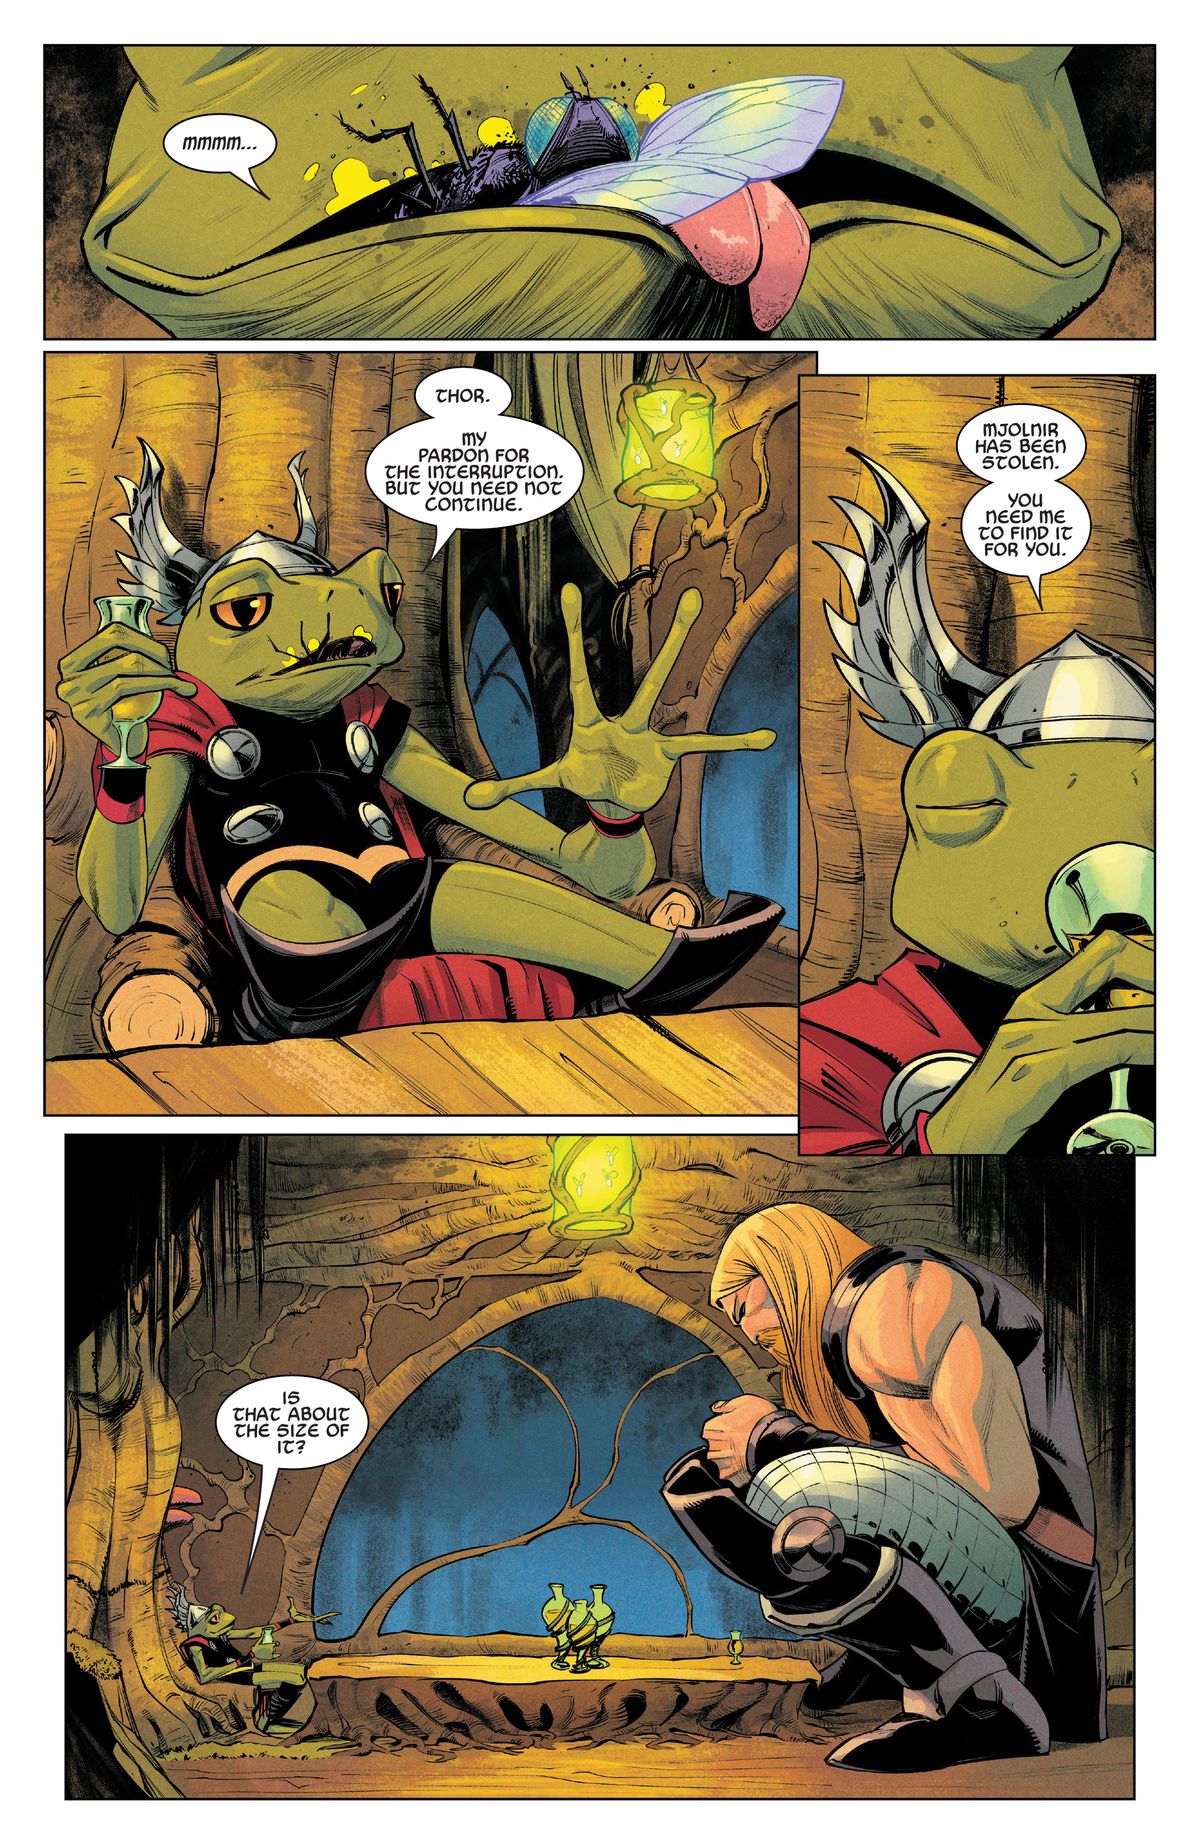 “Mjolnir has been stolen. You need me to find it for you. Is that about the size of it?” says Throg, as he sips a drink from a goblet, and Thor crouches uncomfortably at the end of the frog-sized banquet table in Thor #18 (2021).